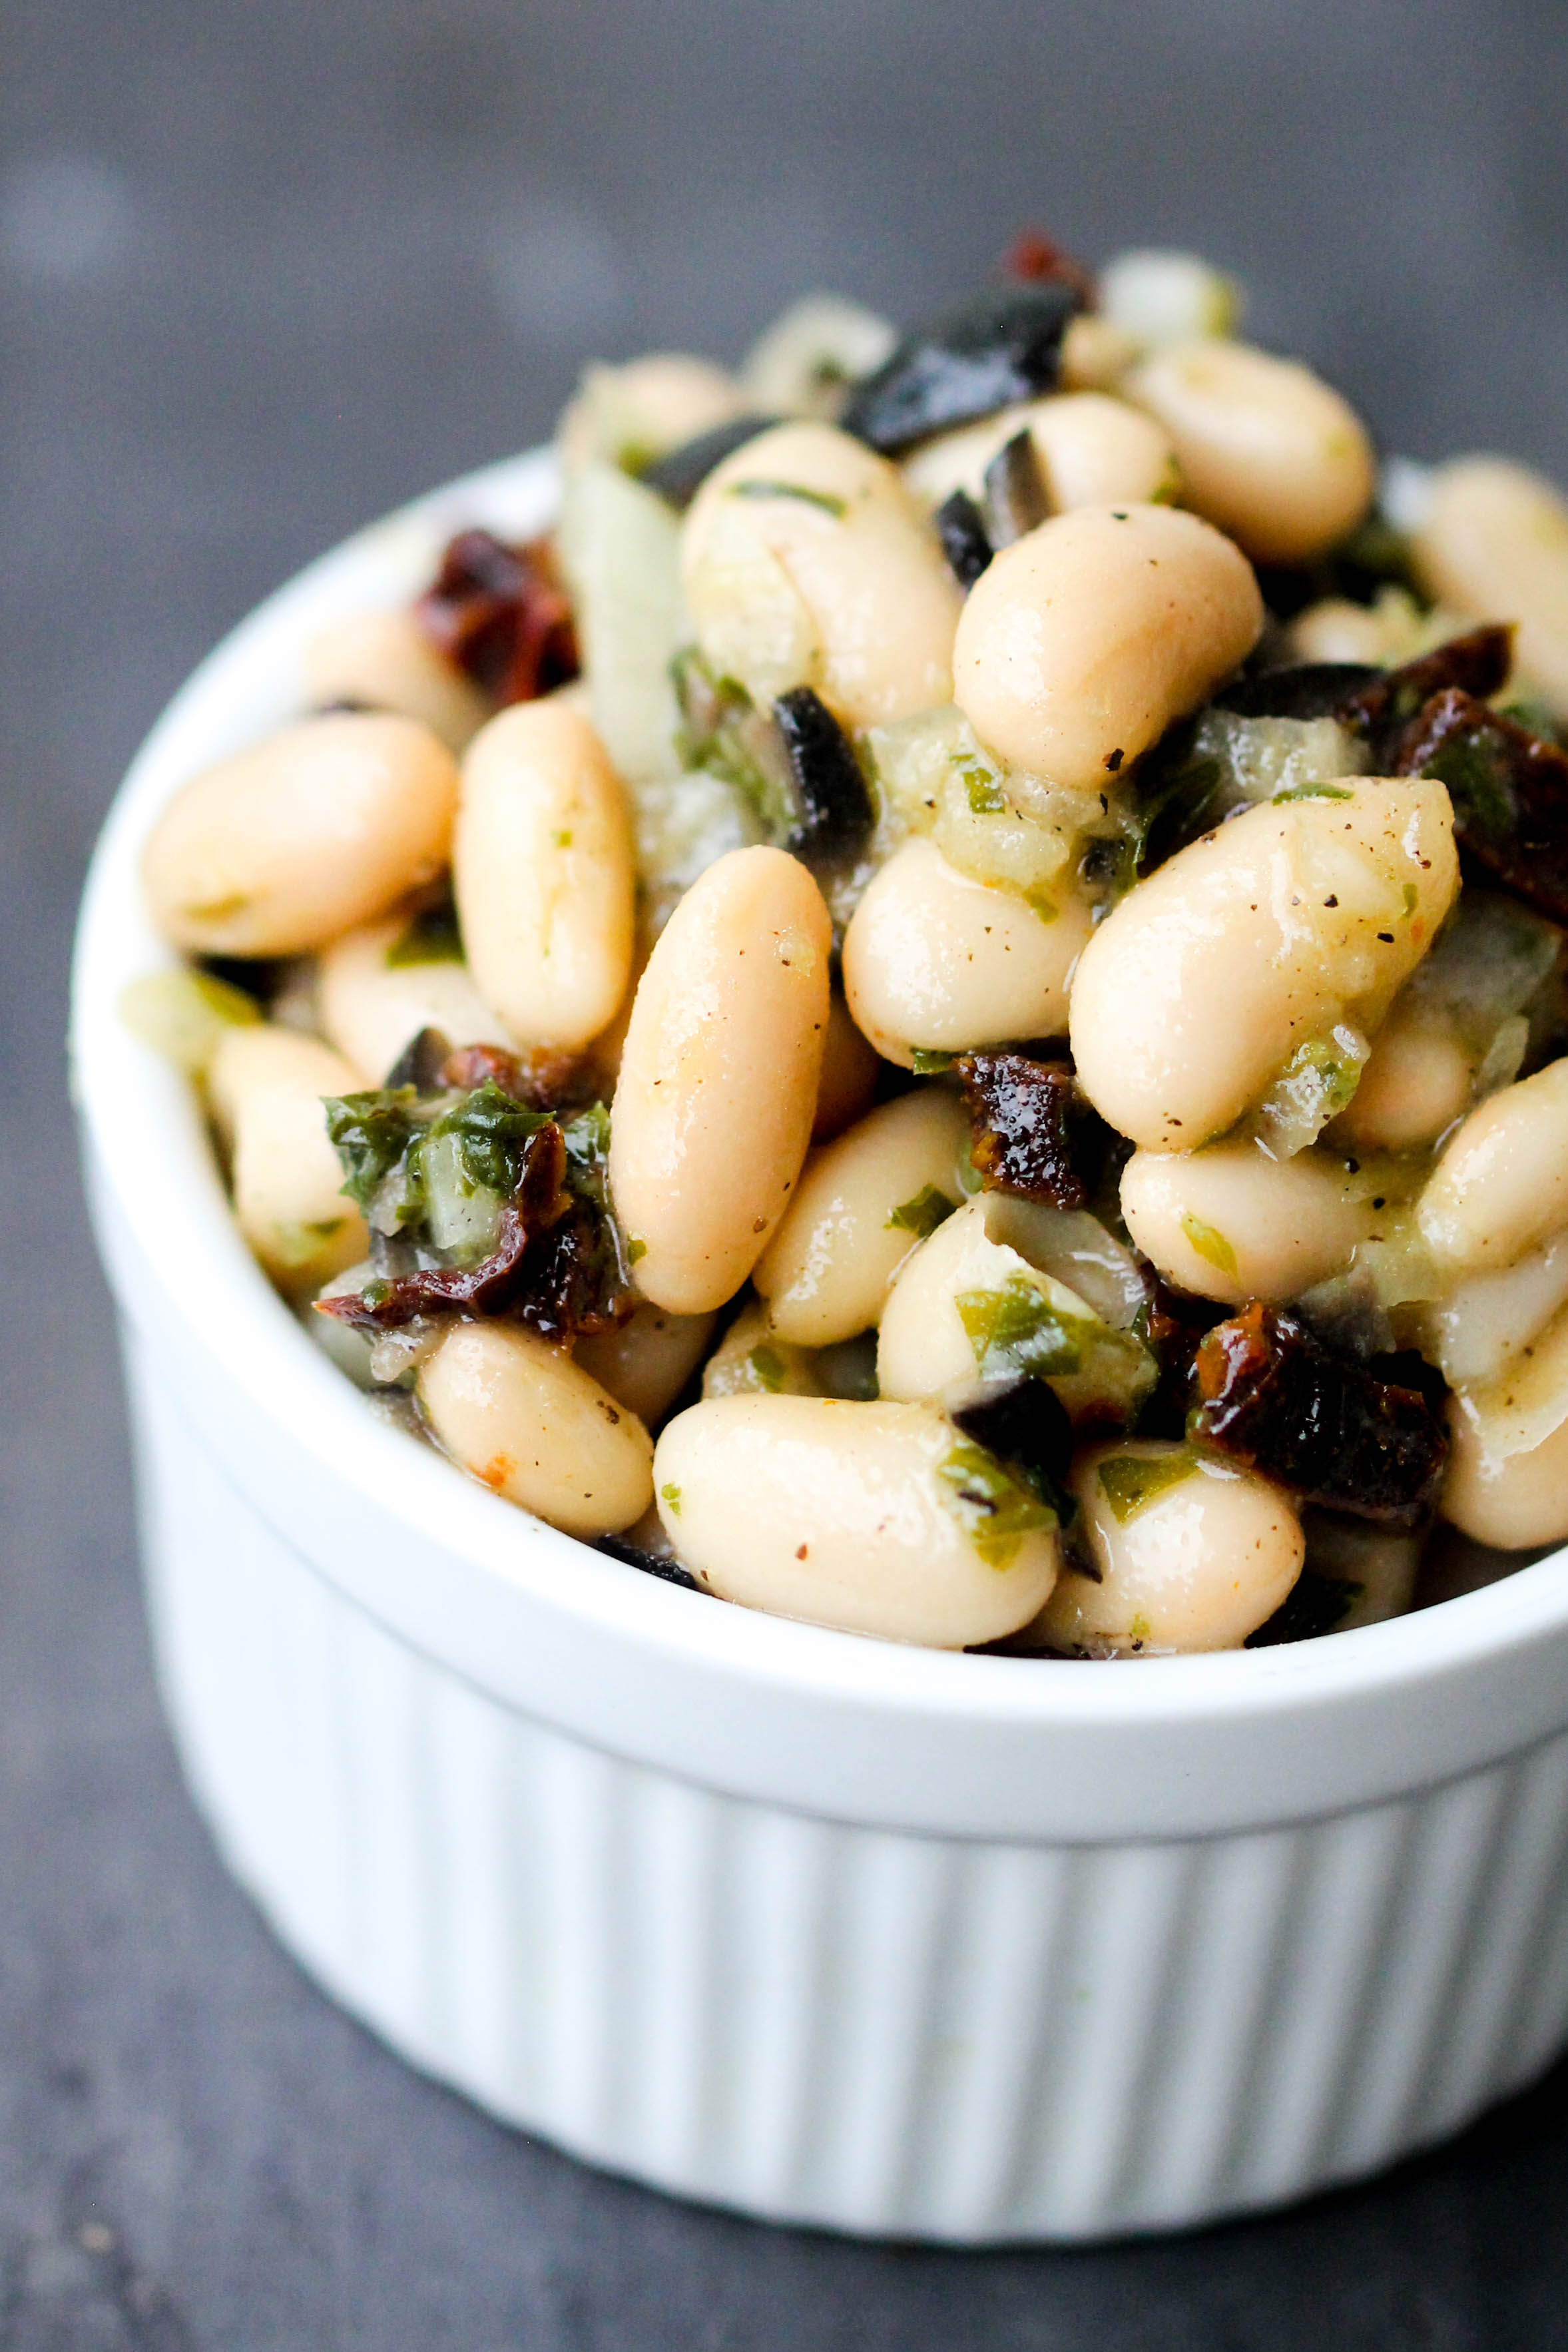 Cannellini Bean Salad with Basil and Sun-Dried Tomatoes makes a lovely light lunch or can be enjoyed as a refreshing side, or take it to a picnic, potluck. It is naturally vegan & gluten-free.